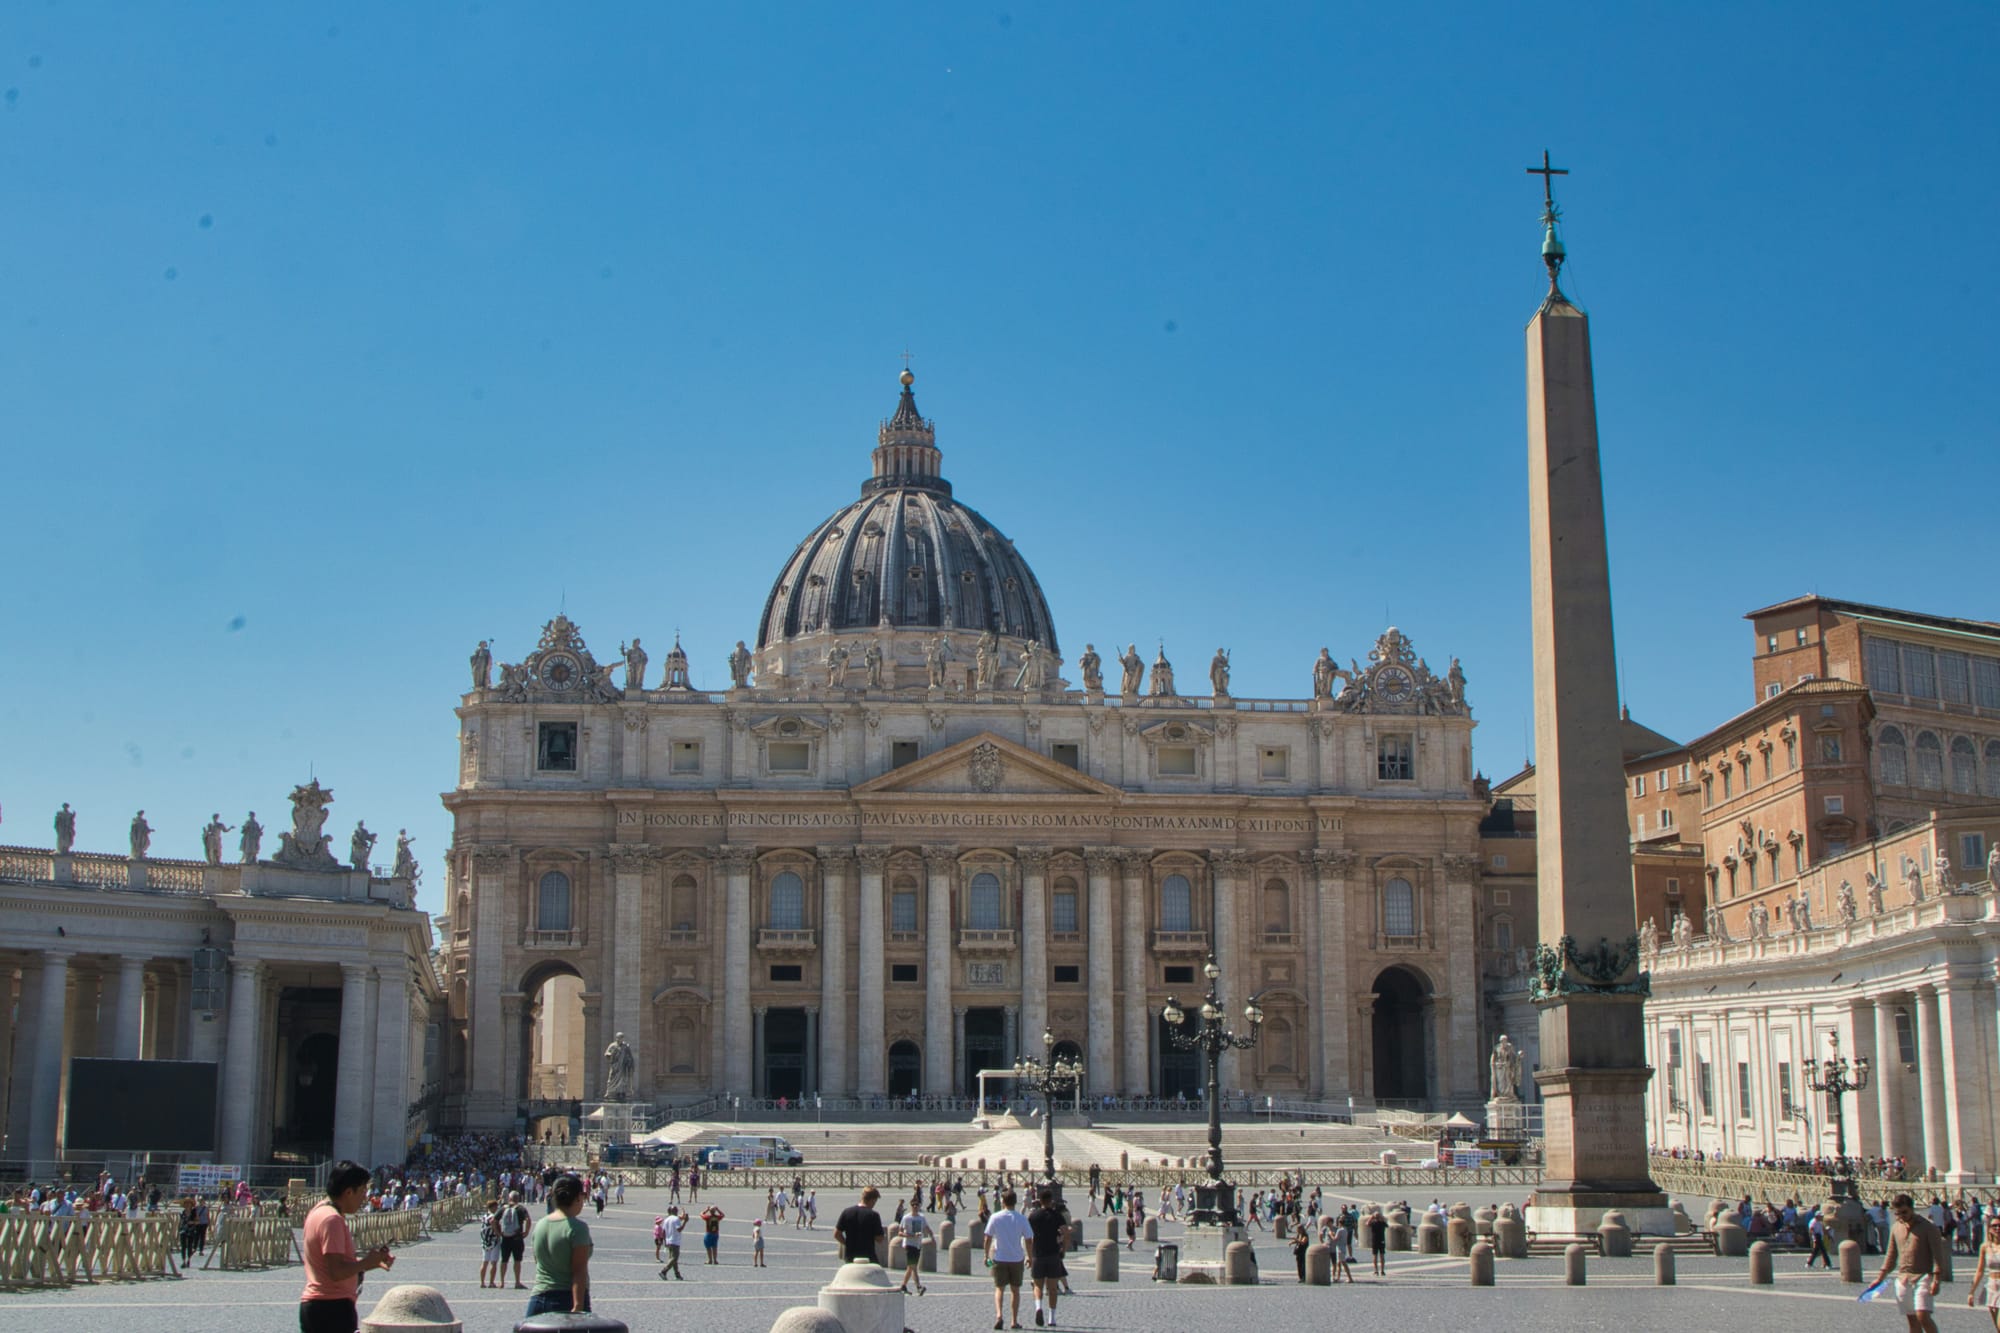 St Peter's Basilica is an accessible church and attraction in Rome